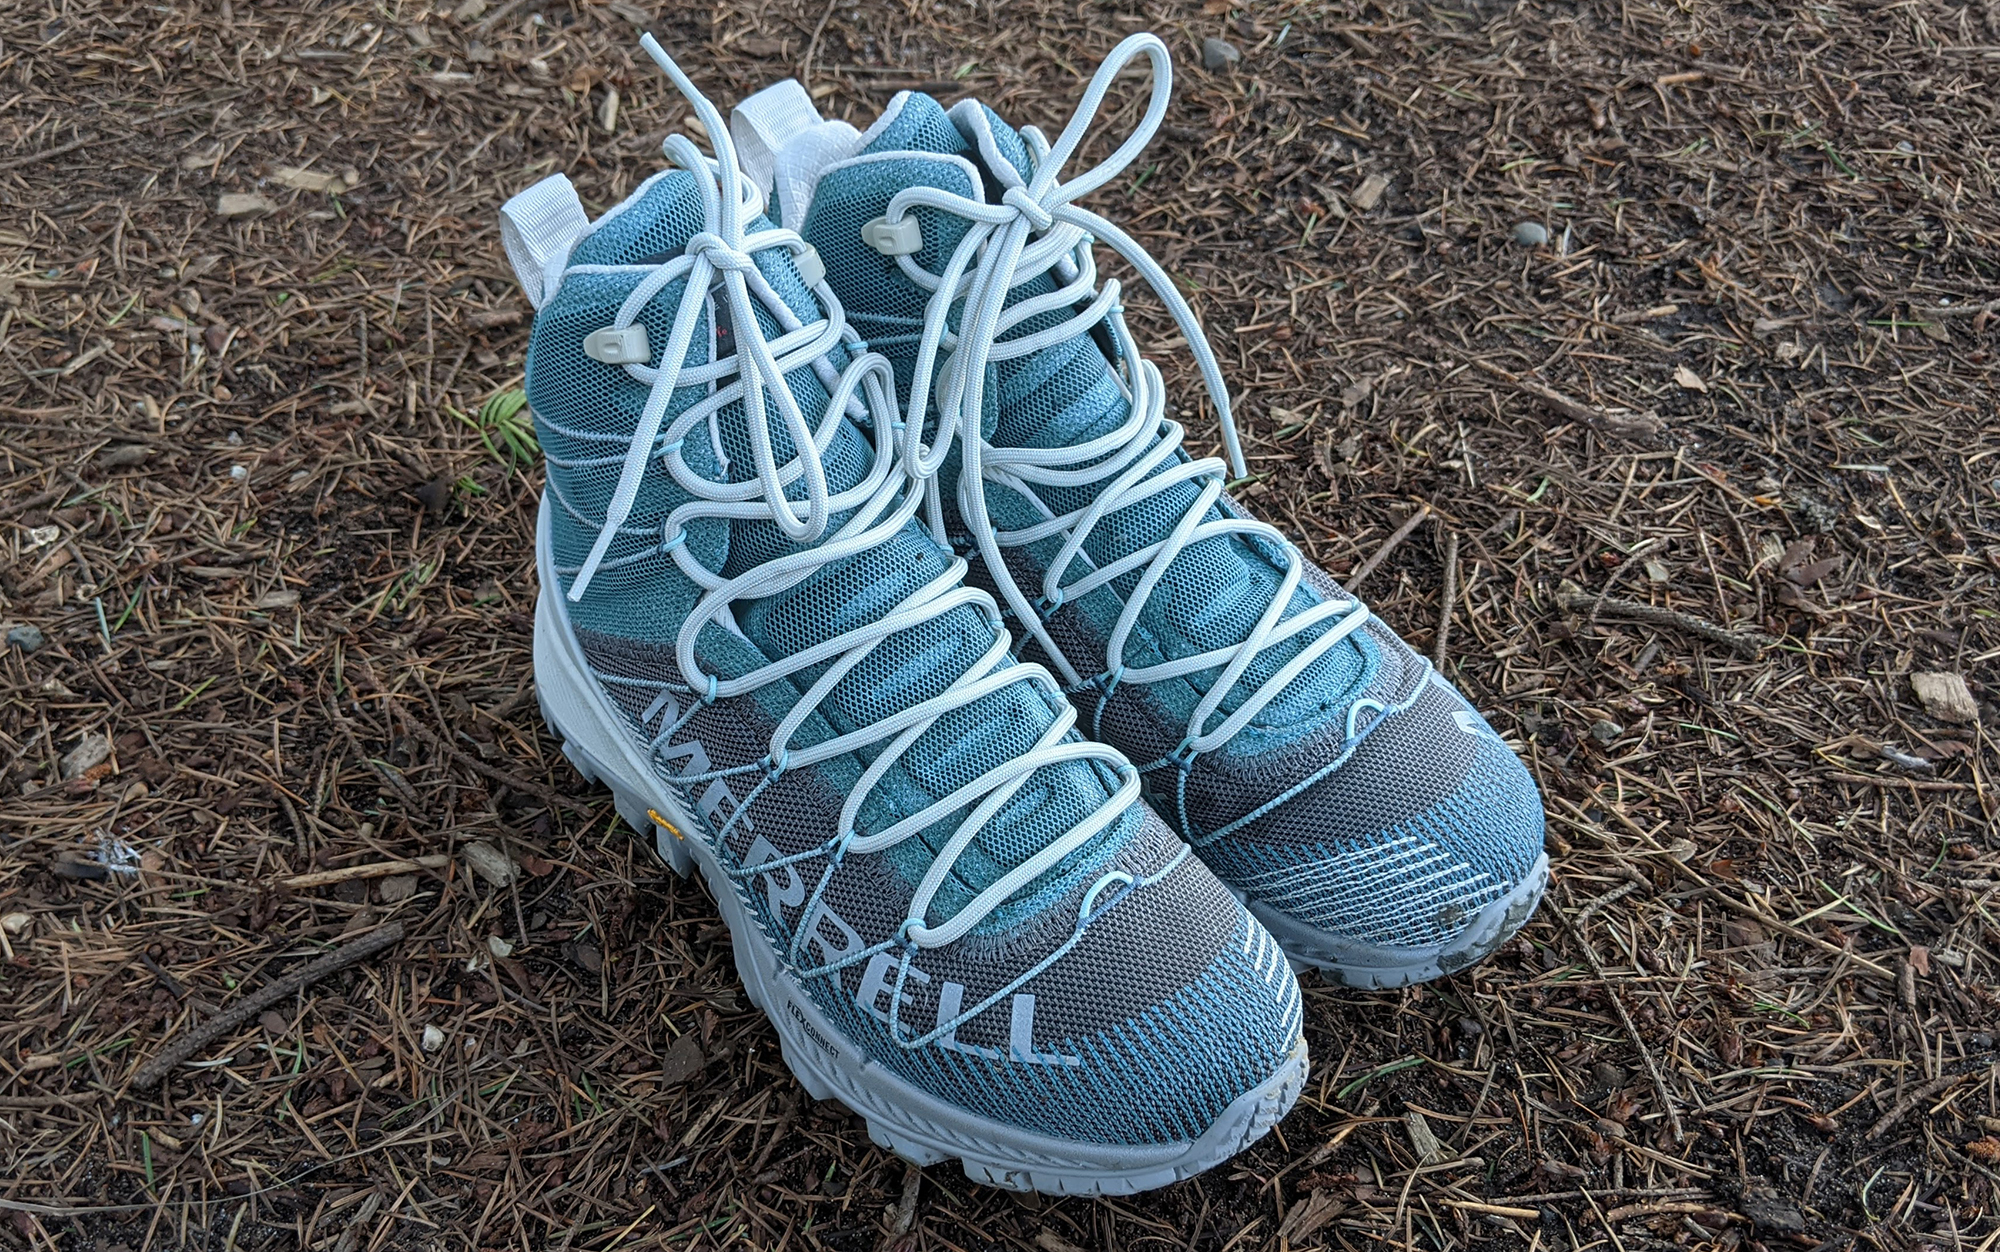 The Merrell Thermo Rogue is one of the best waterproof hiking boots.